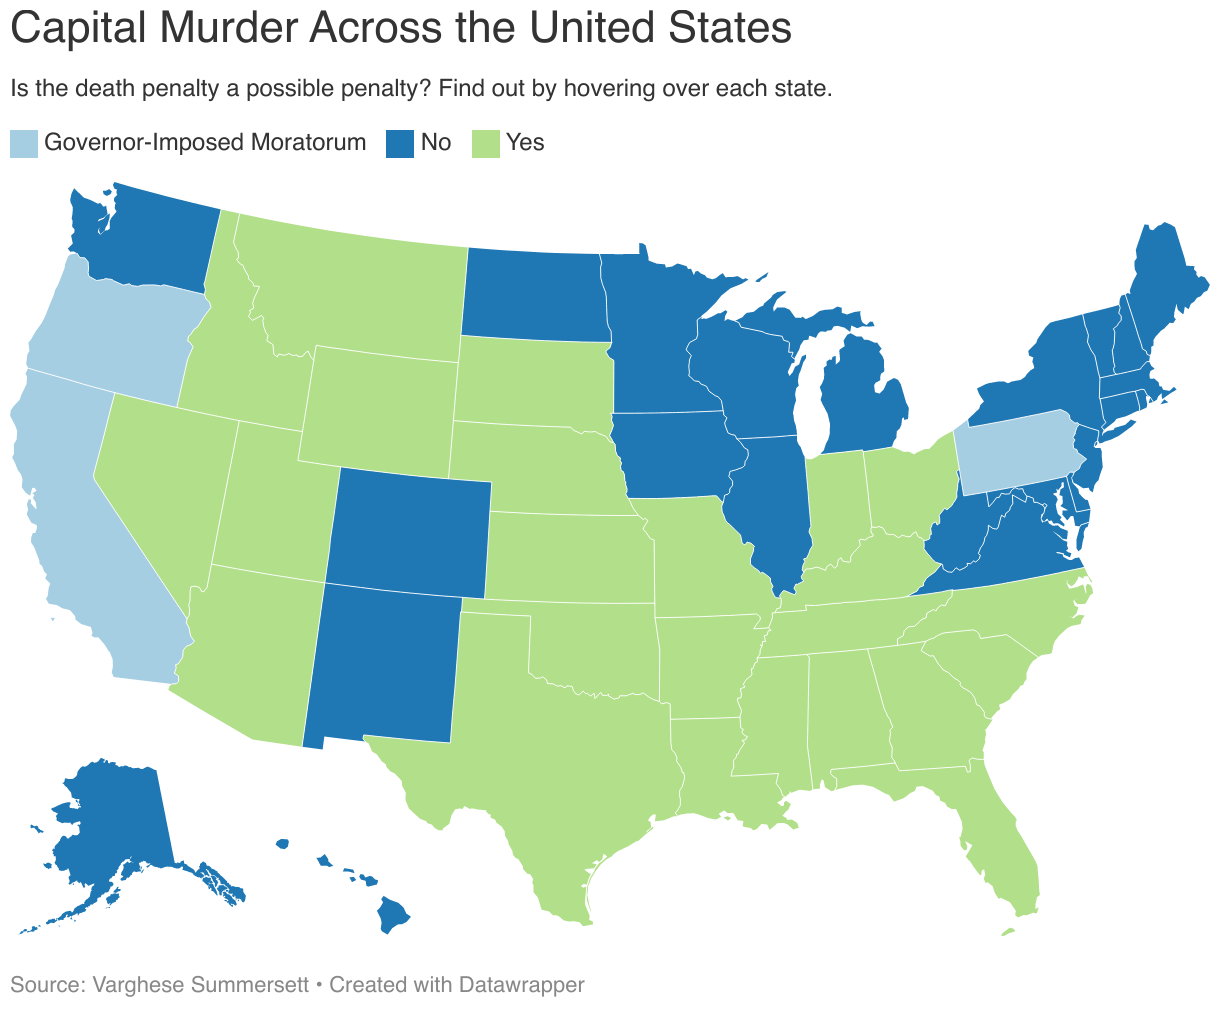 What is Capital Murder?